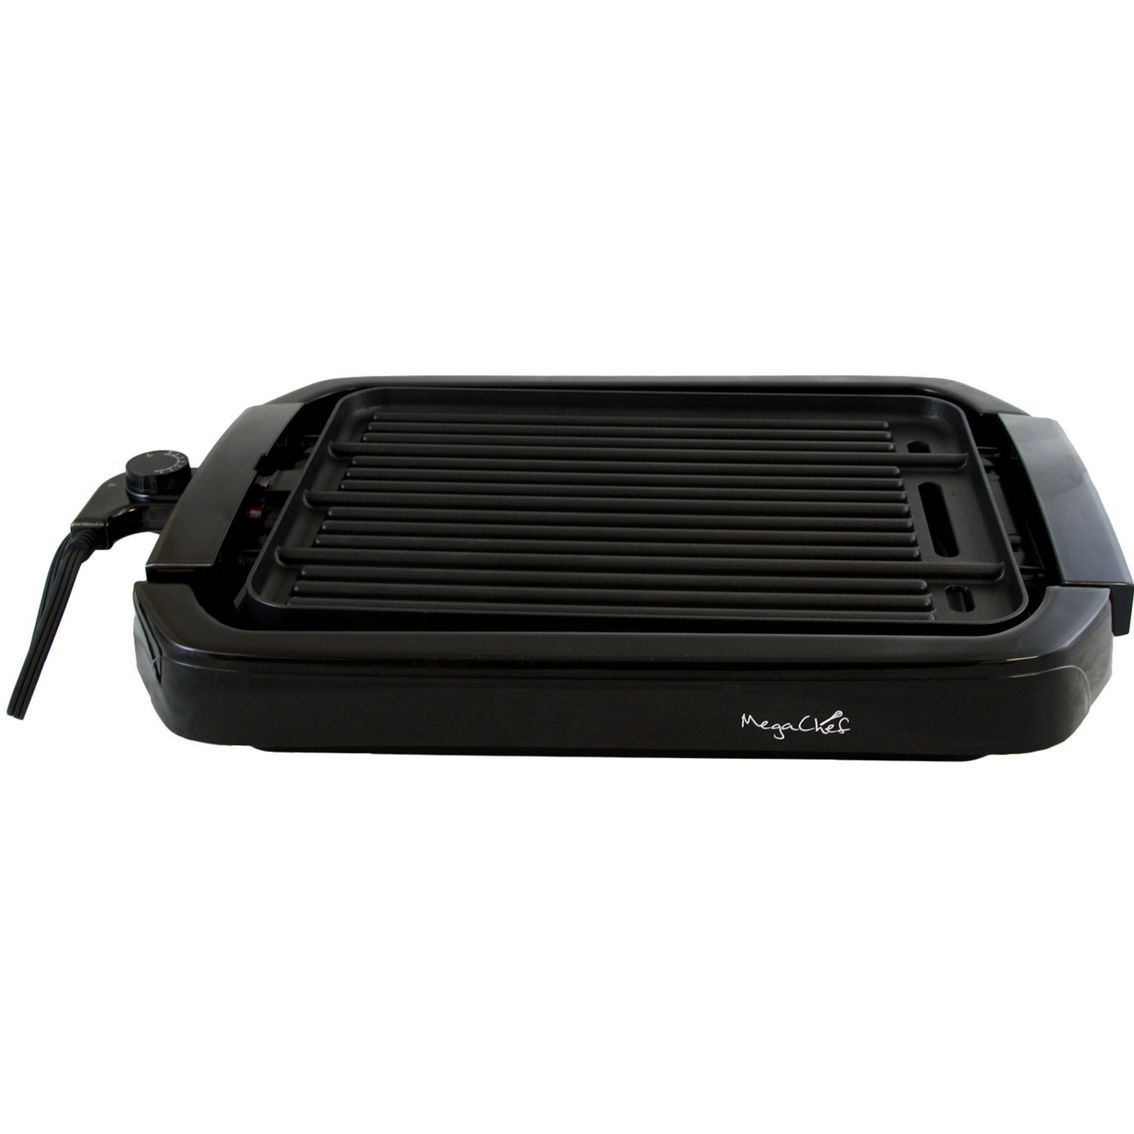 MegaChef Dual Surface Reversible Indoor Grill and Griddle - Image 4 of 5